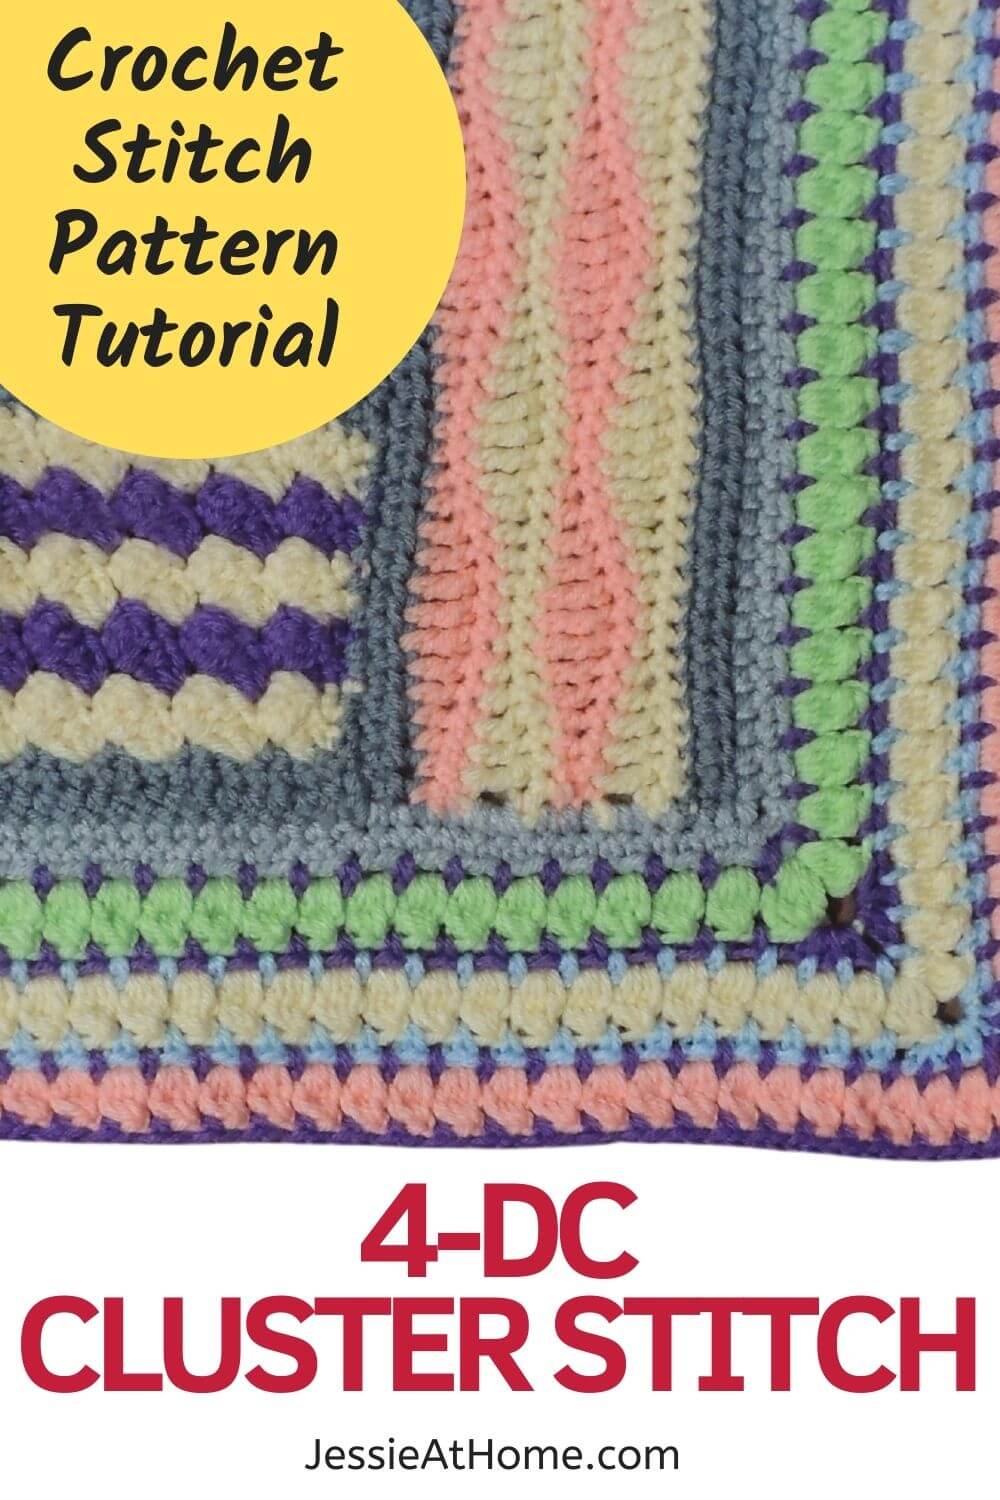 How To Crochet the 4 DC Cluster Stitch – Step-by-Step Tutorial